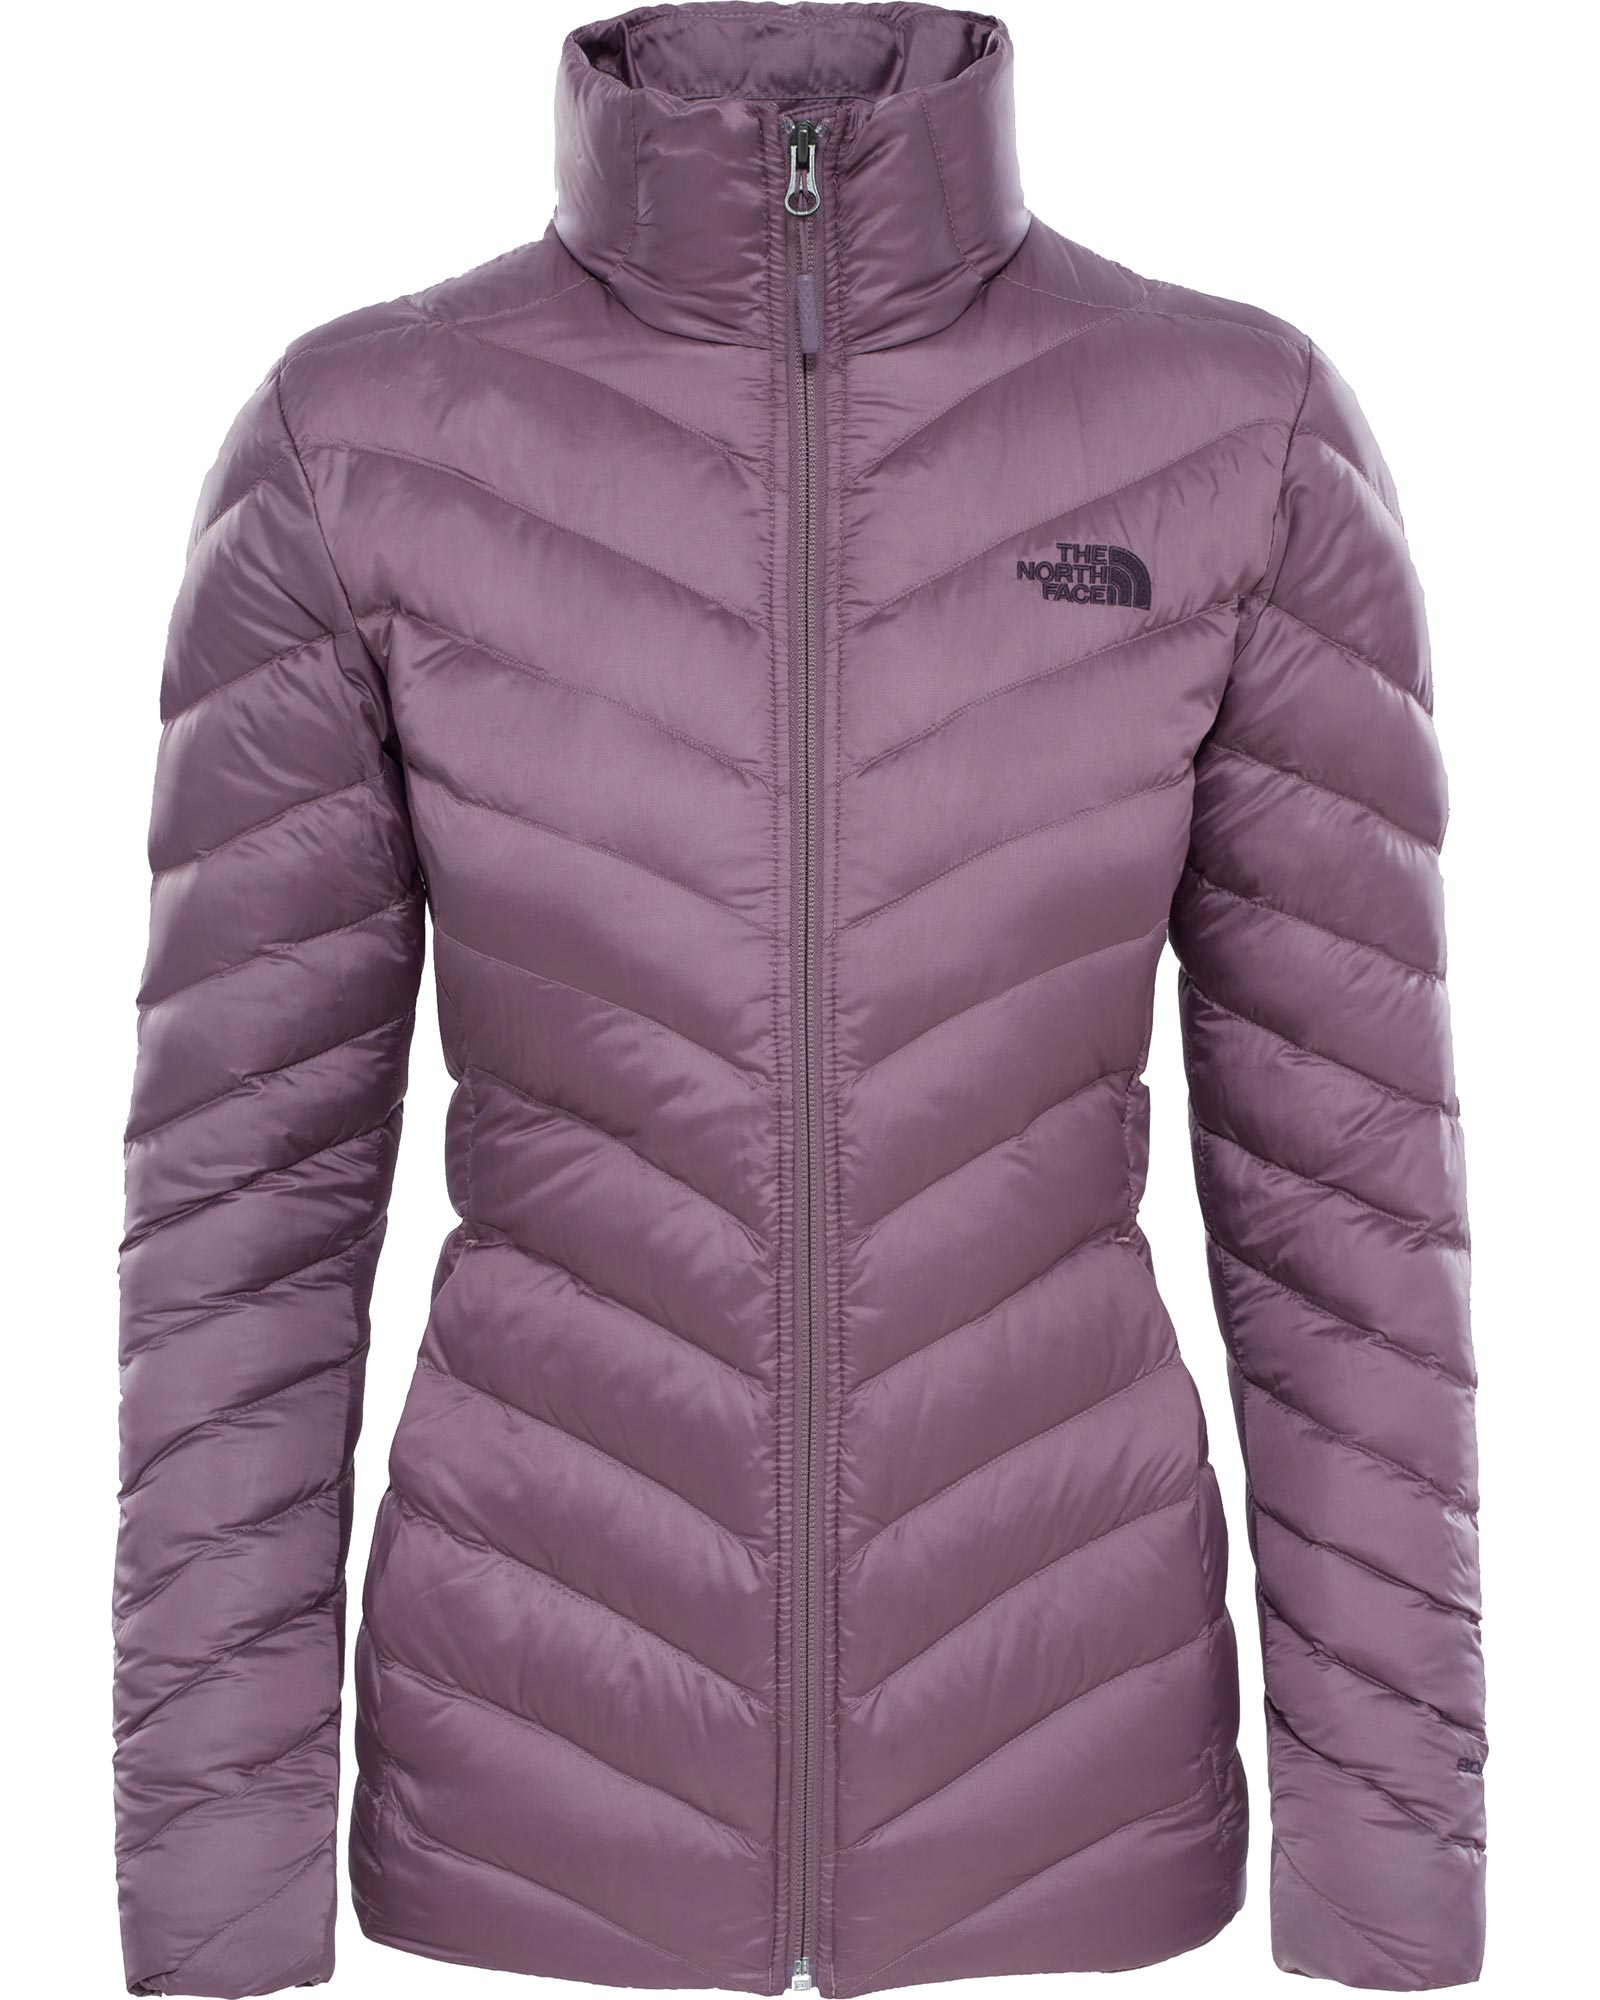 The North Face Trevail Womens Jacket